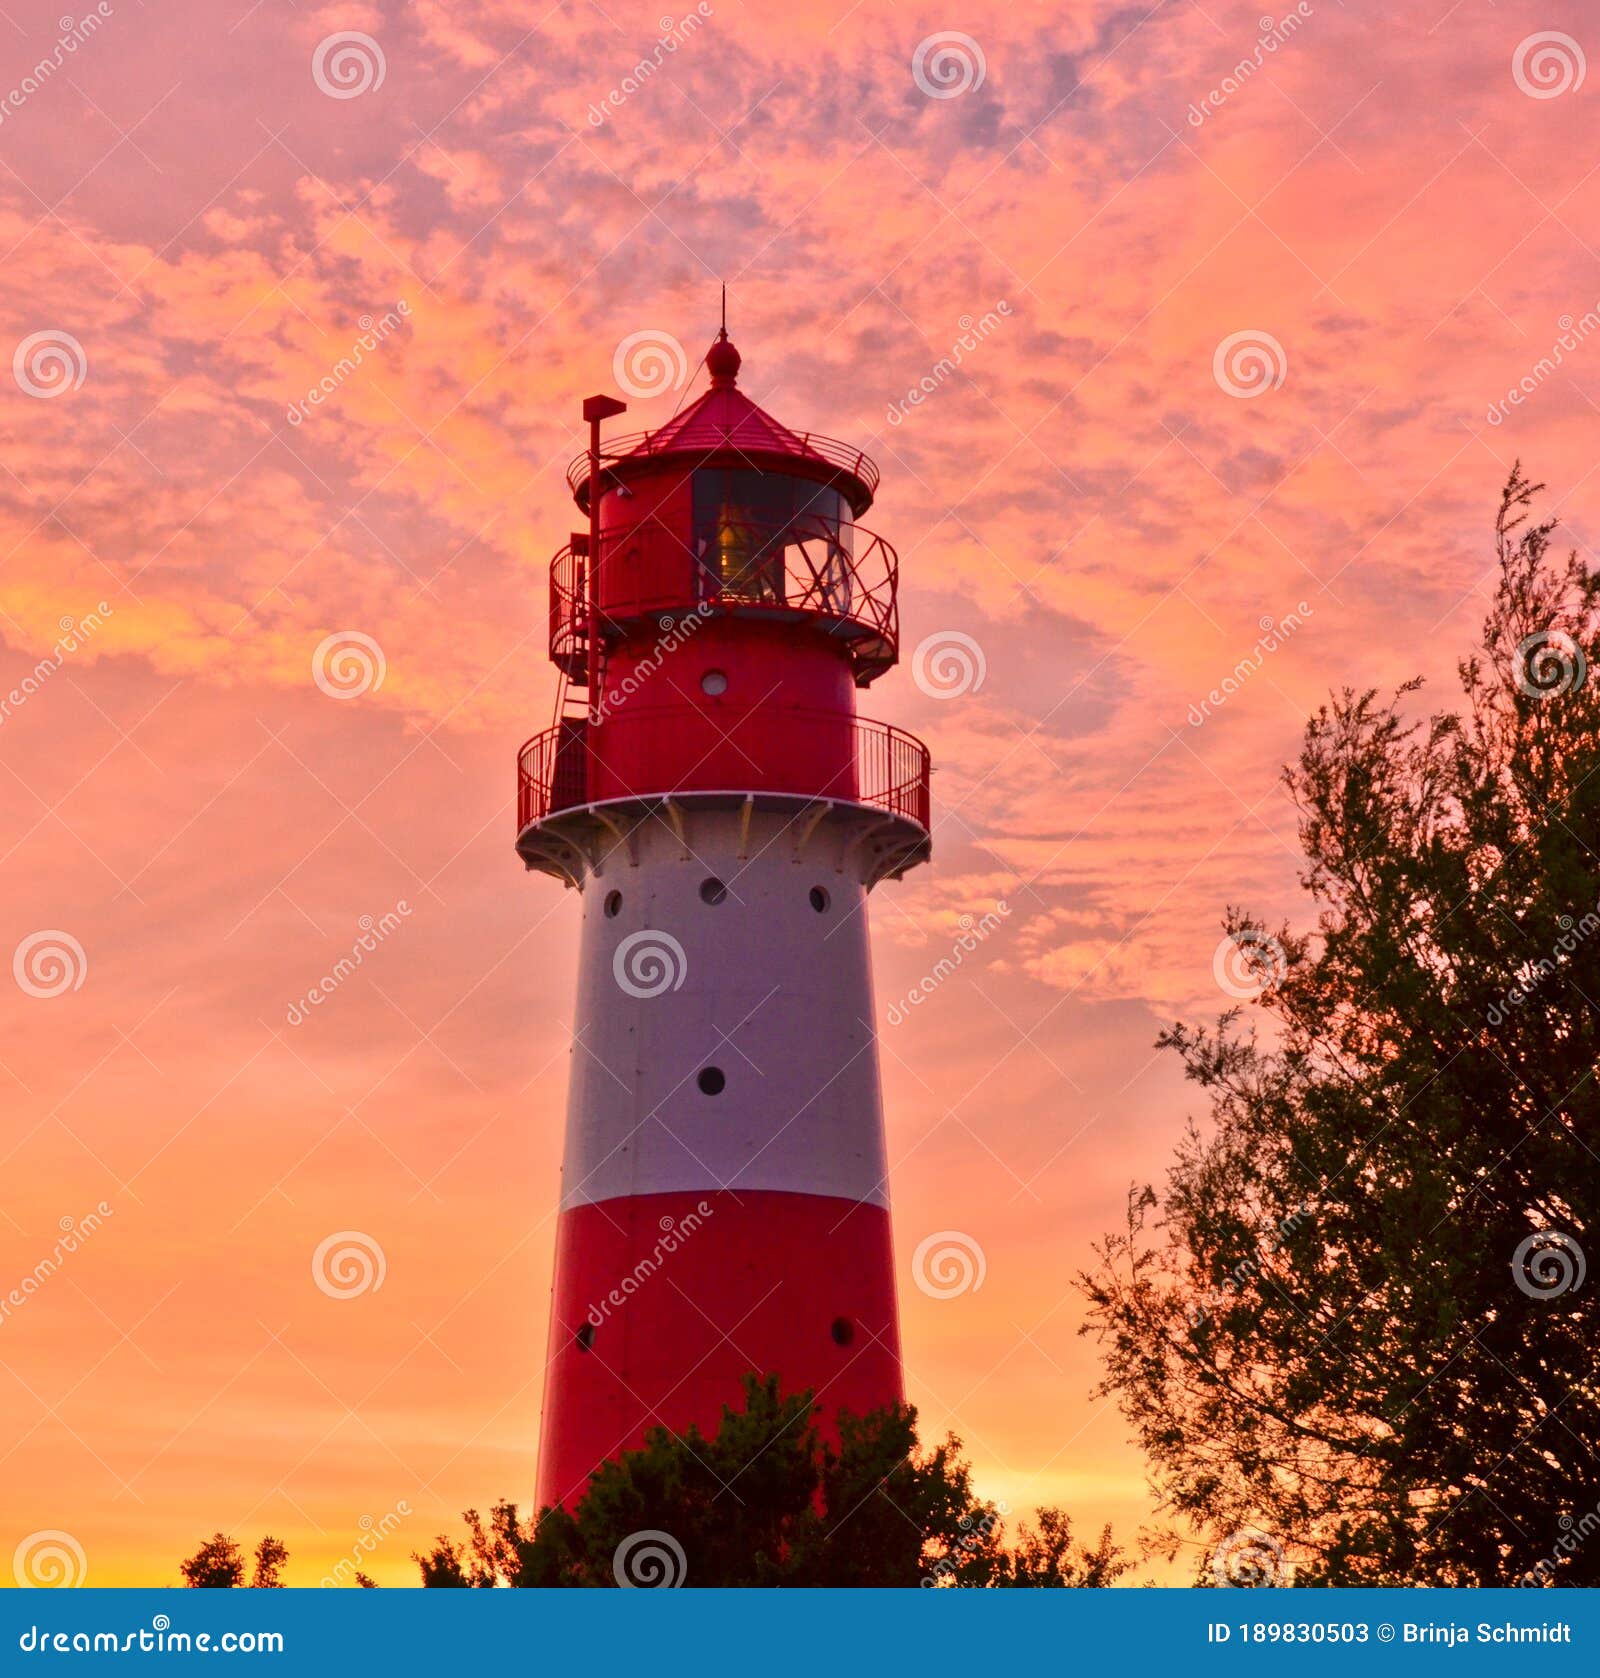 a small and beautiful lighthouse in the evening dawn sunset with pink clouds and bright light in falshÃÂ¶ft, germany